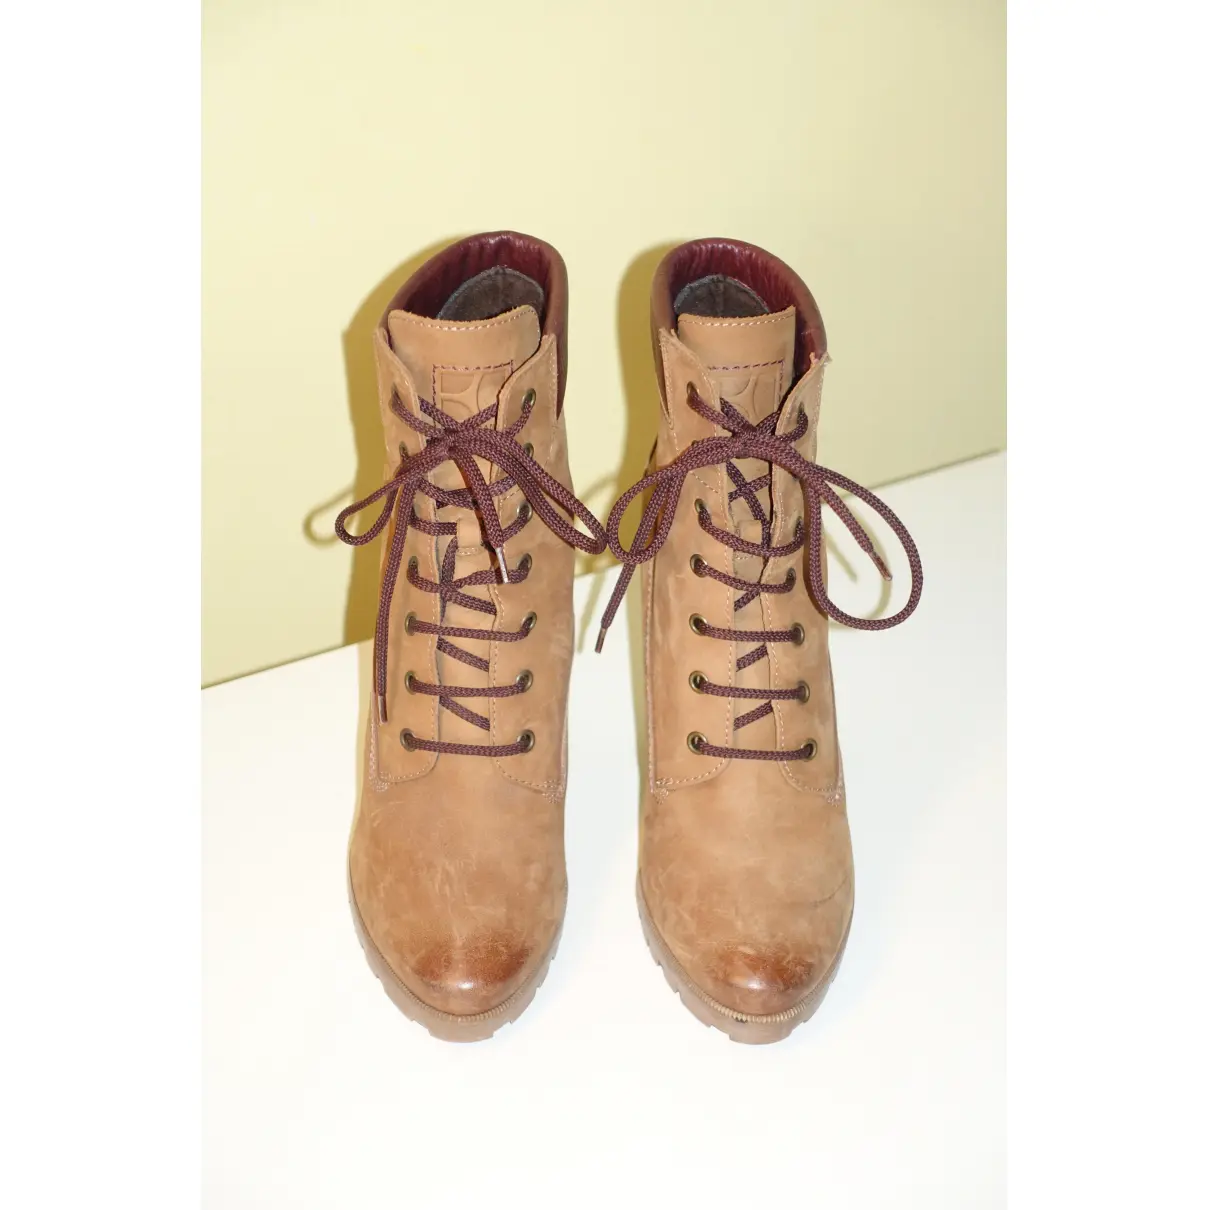 Buy Boss Orange Leather lace up boots online